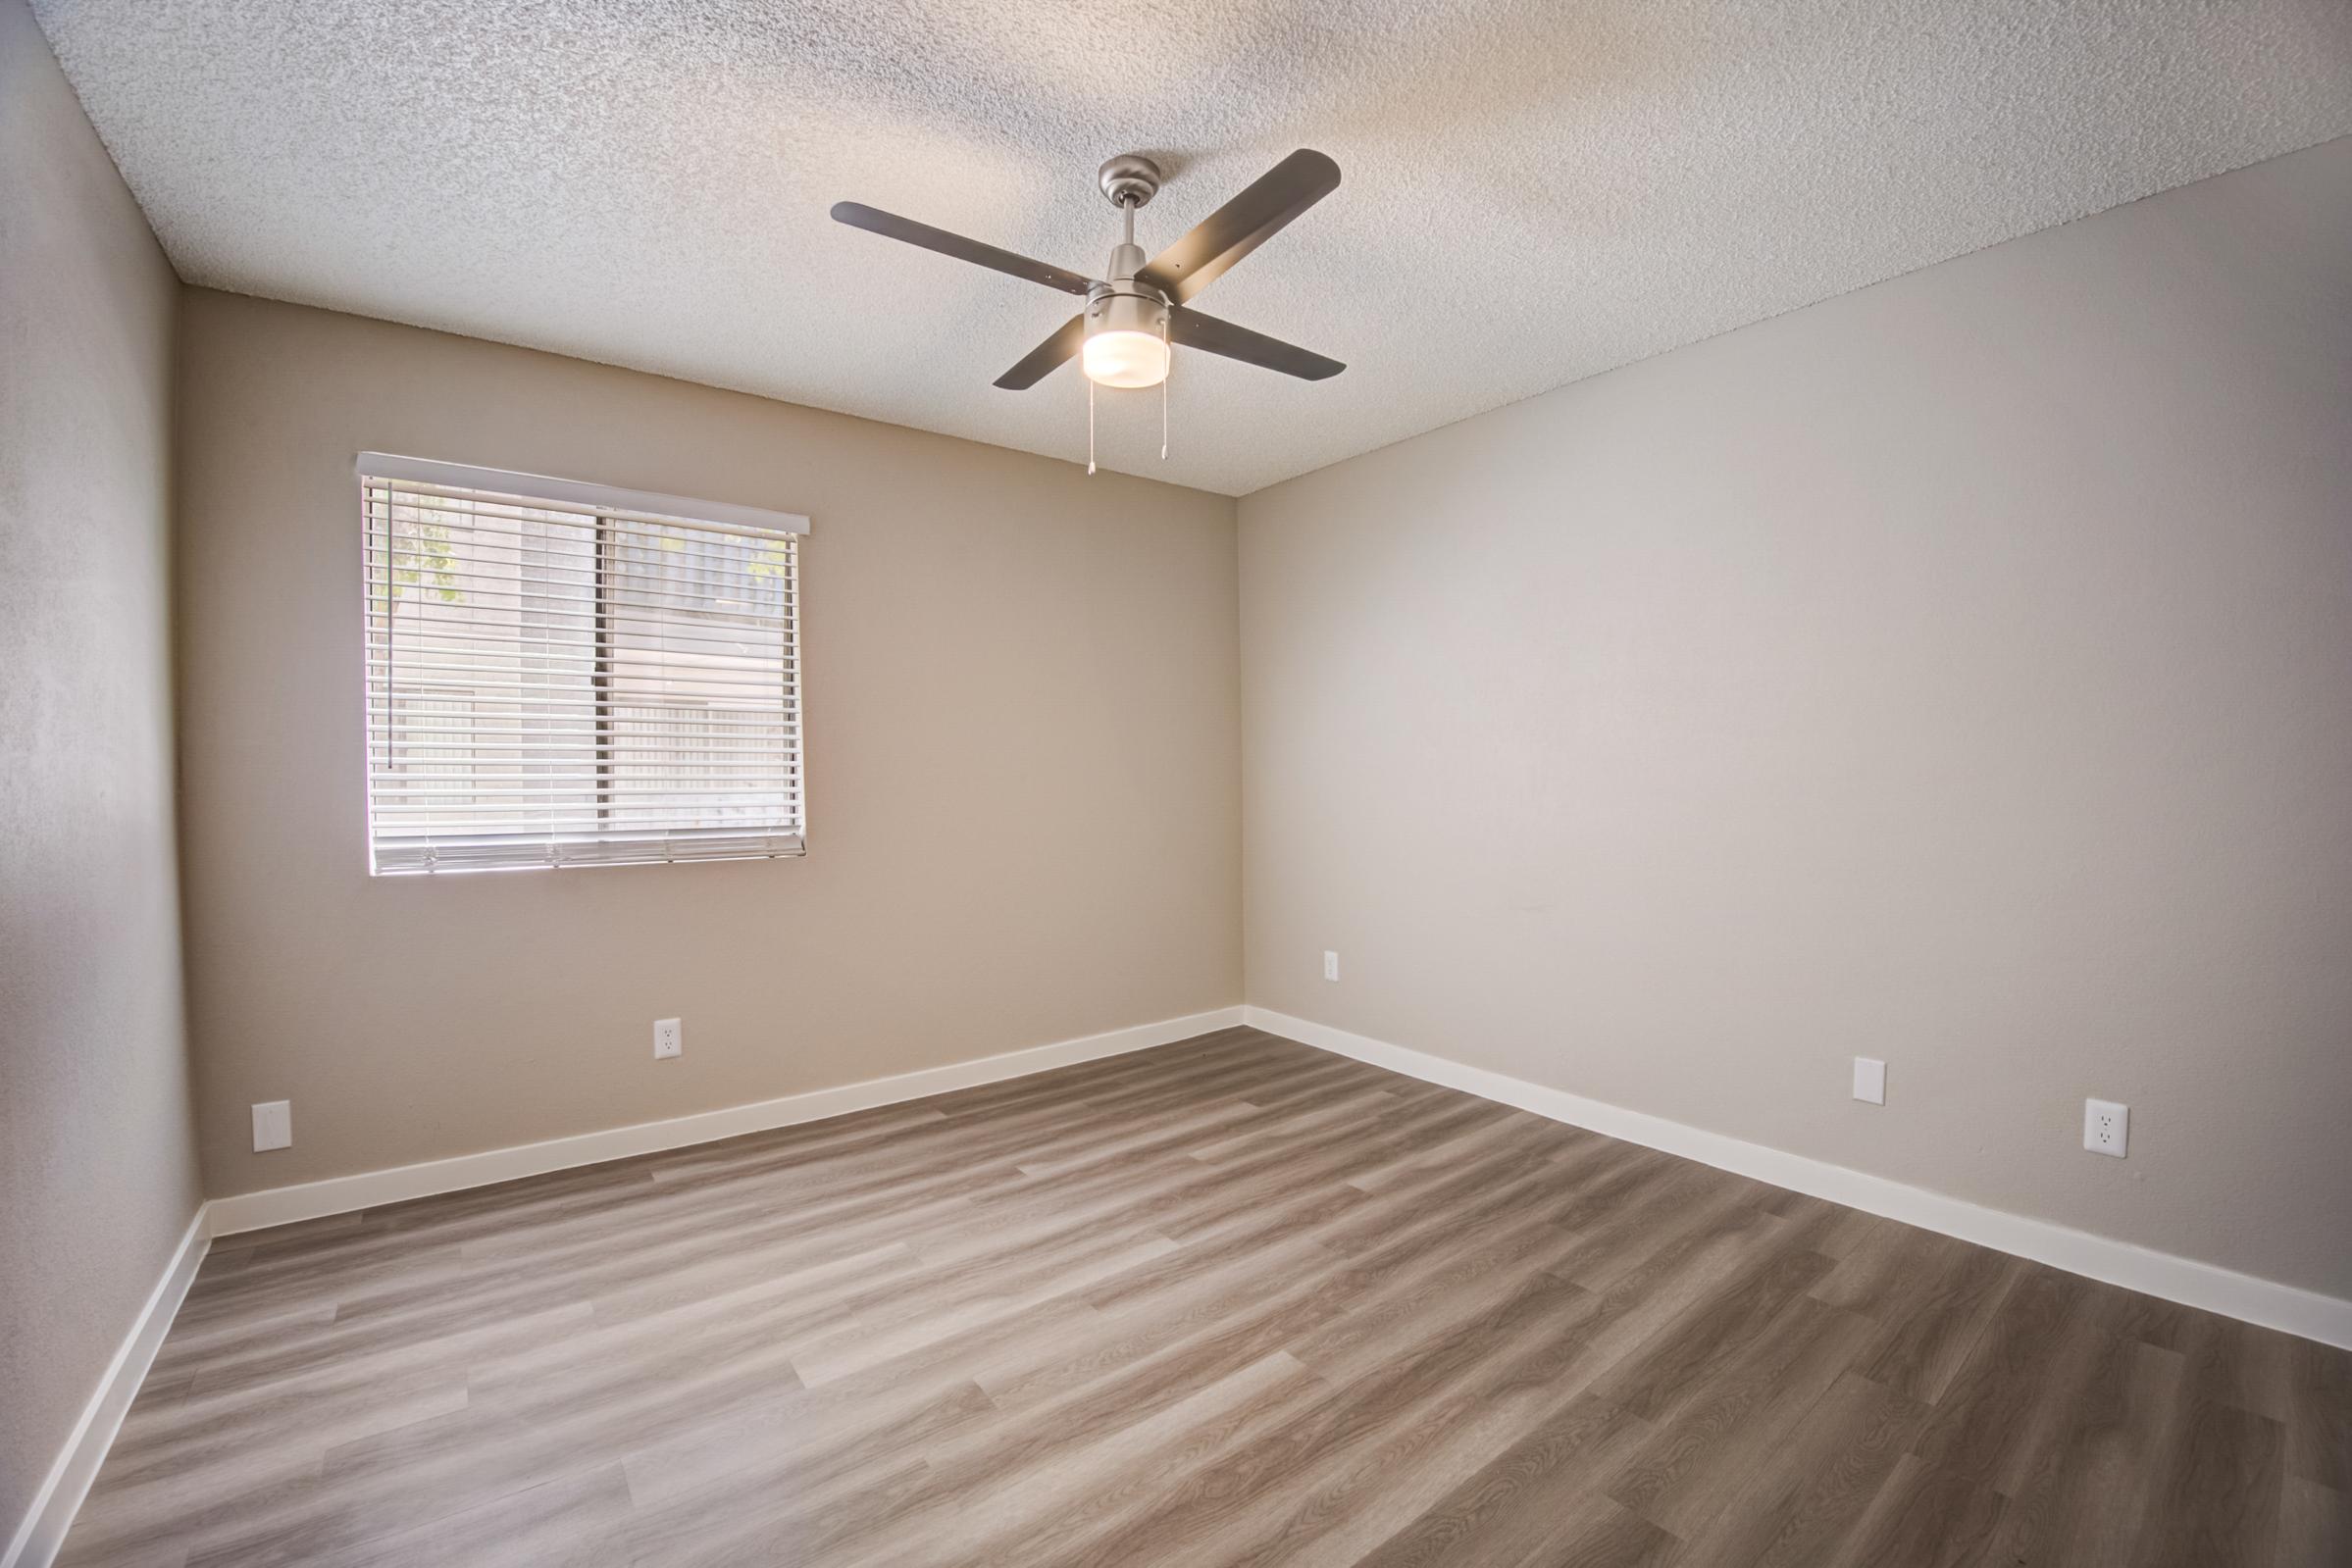 A bedroom at Rise at the Meadows with wood-style flooring and a ceiling fan.